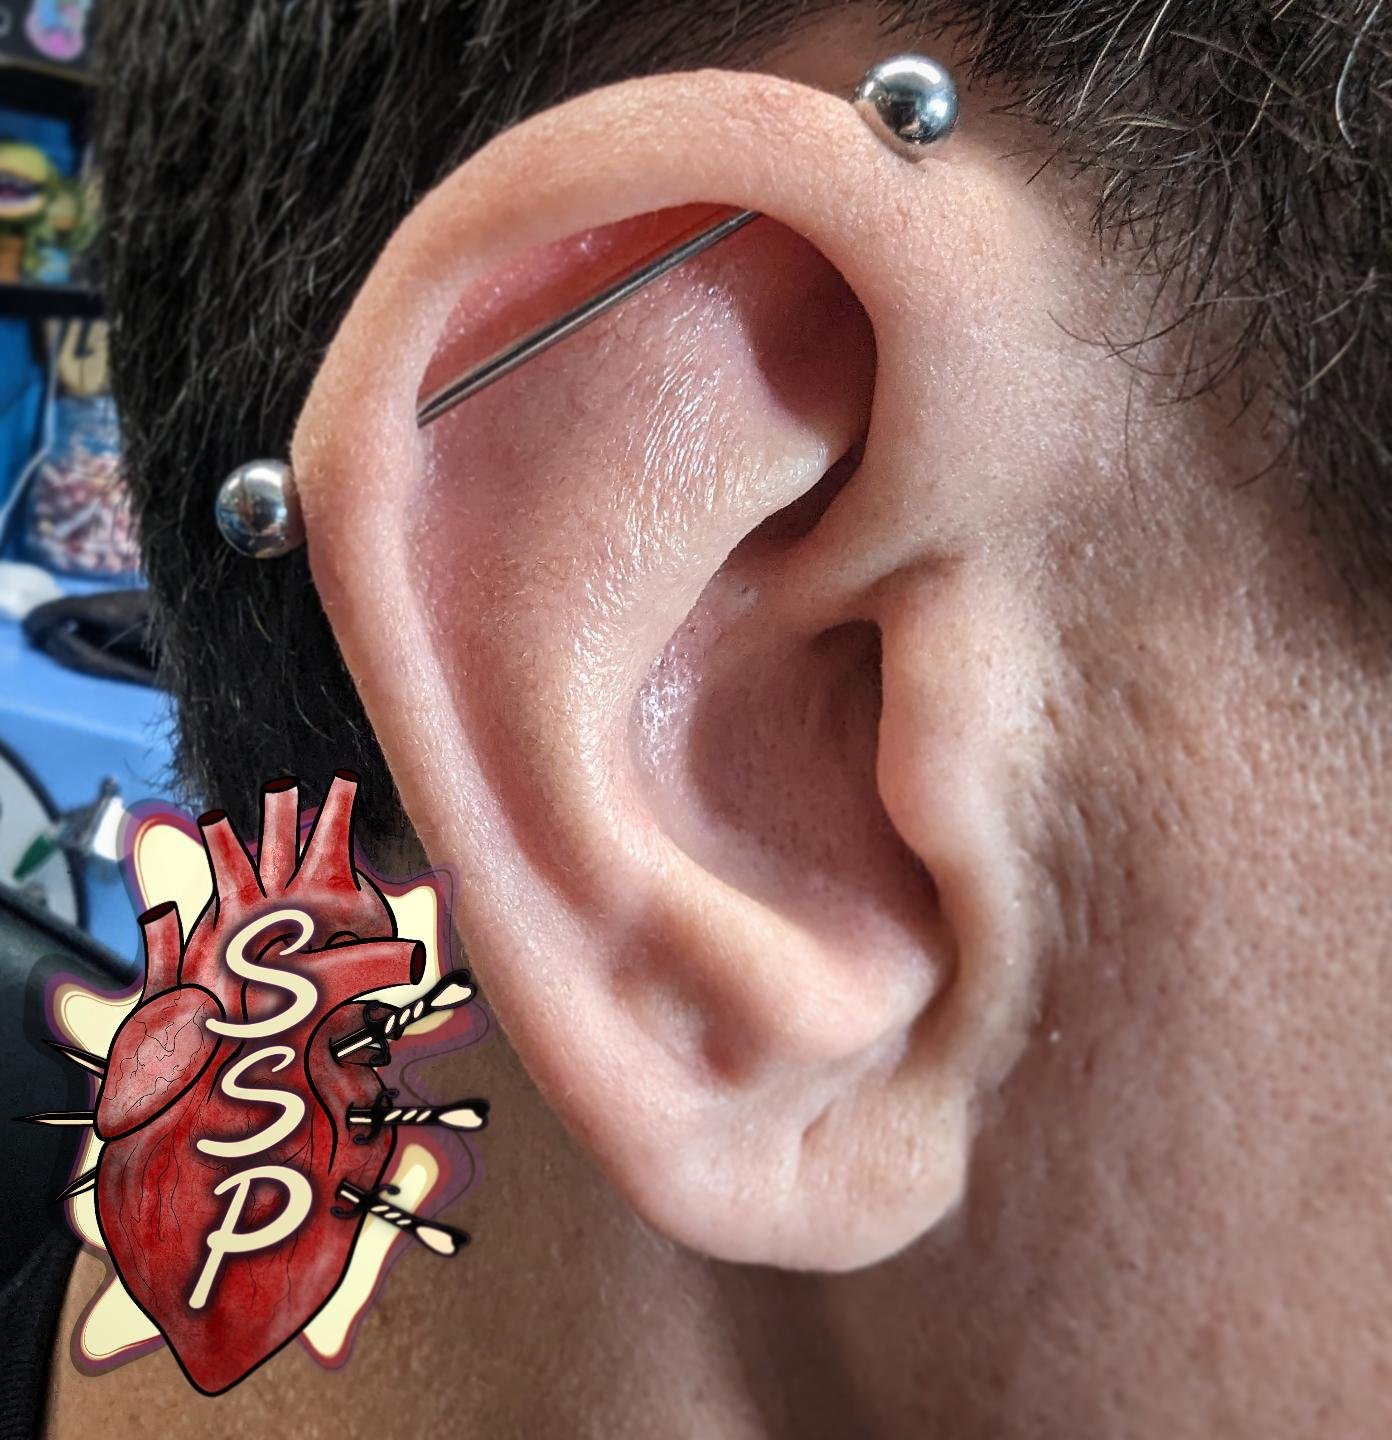 Healed industrial we did back in September. 

If you're interested in coming in for a piercing. There is no appointment needed, you can just come into the shop while we are open. Any questions about piercings you can always give the shop a call or go